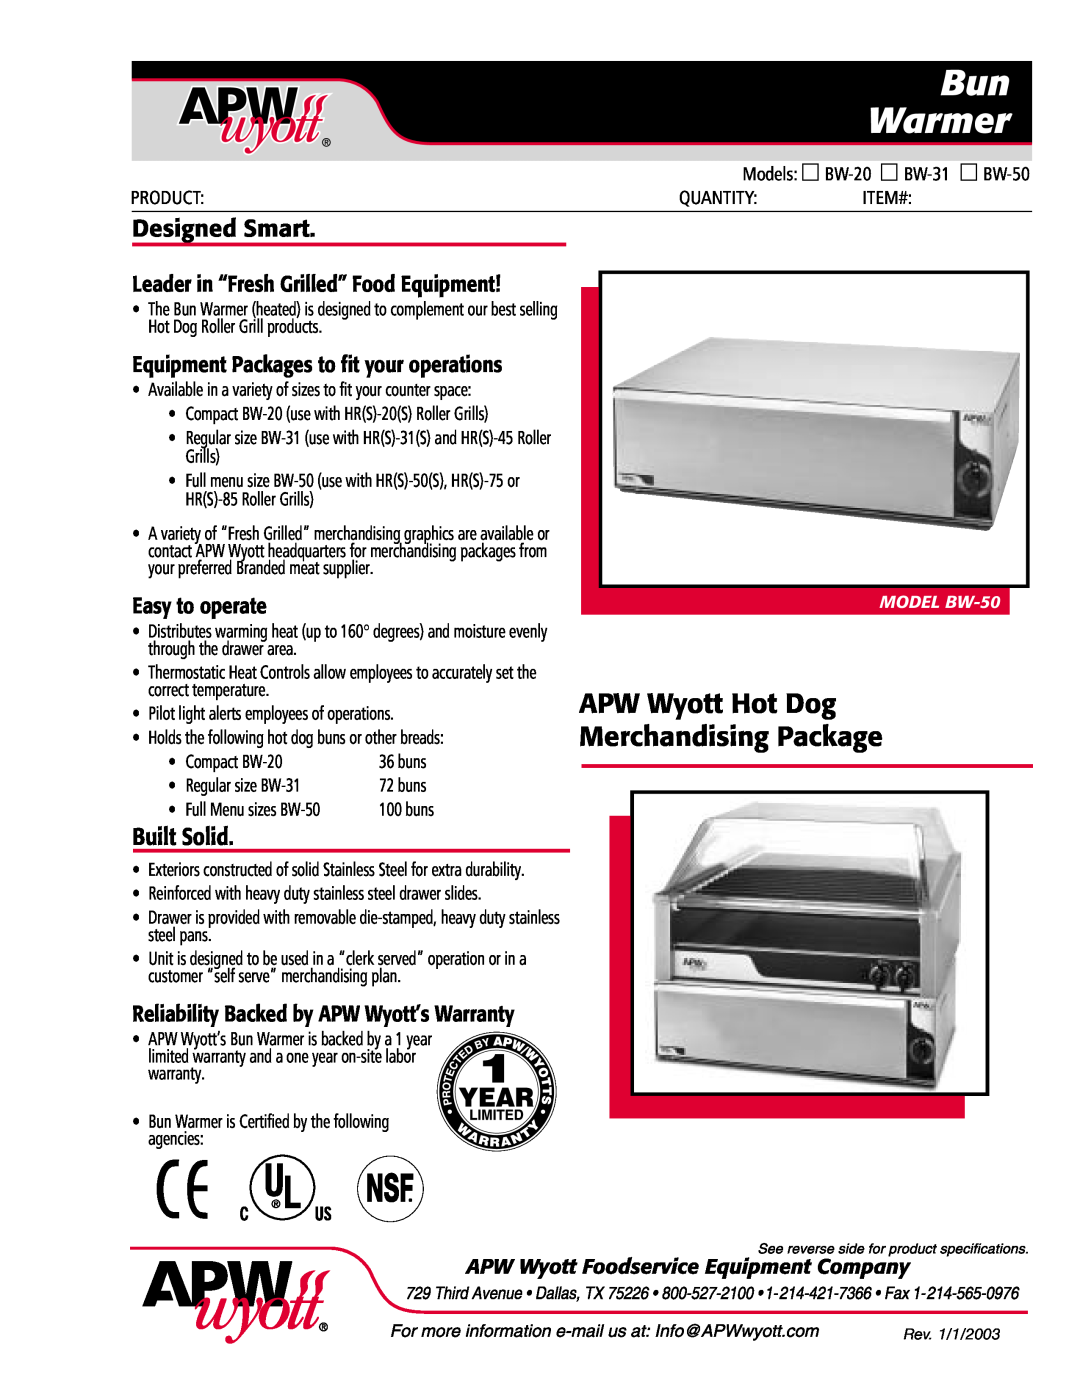 APW Wyott BW-20 warranty Warmer, Leader in “Fresh Grilled” Food Equipment, Equipment Packages to fit your operations 